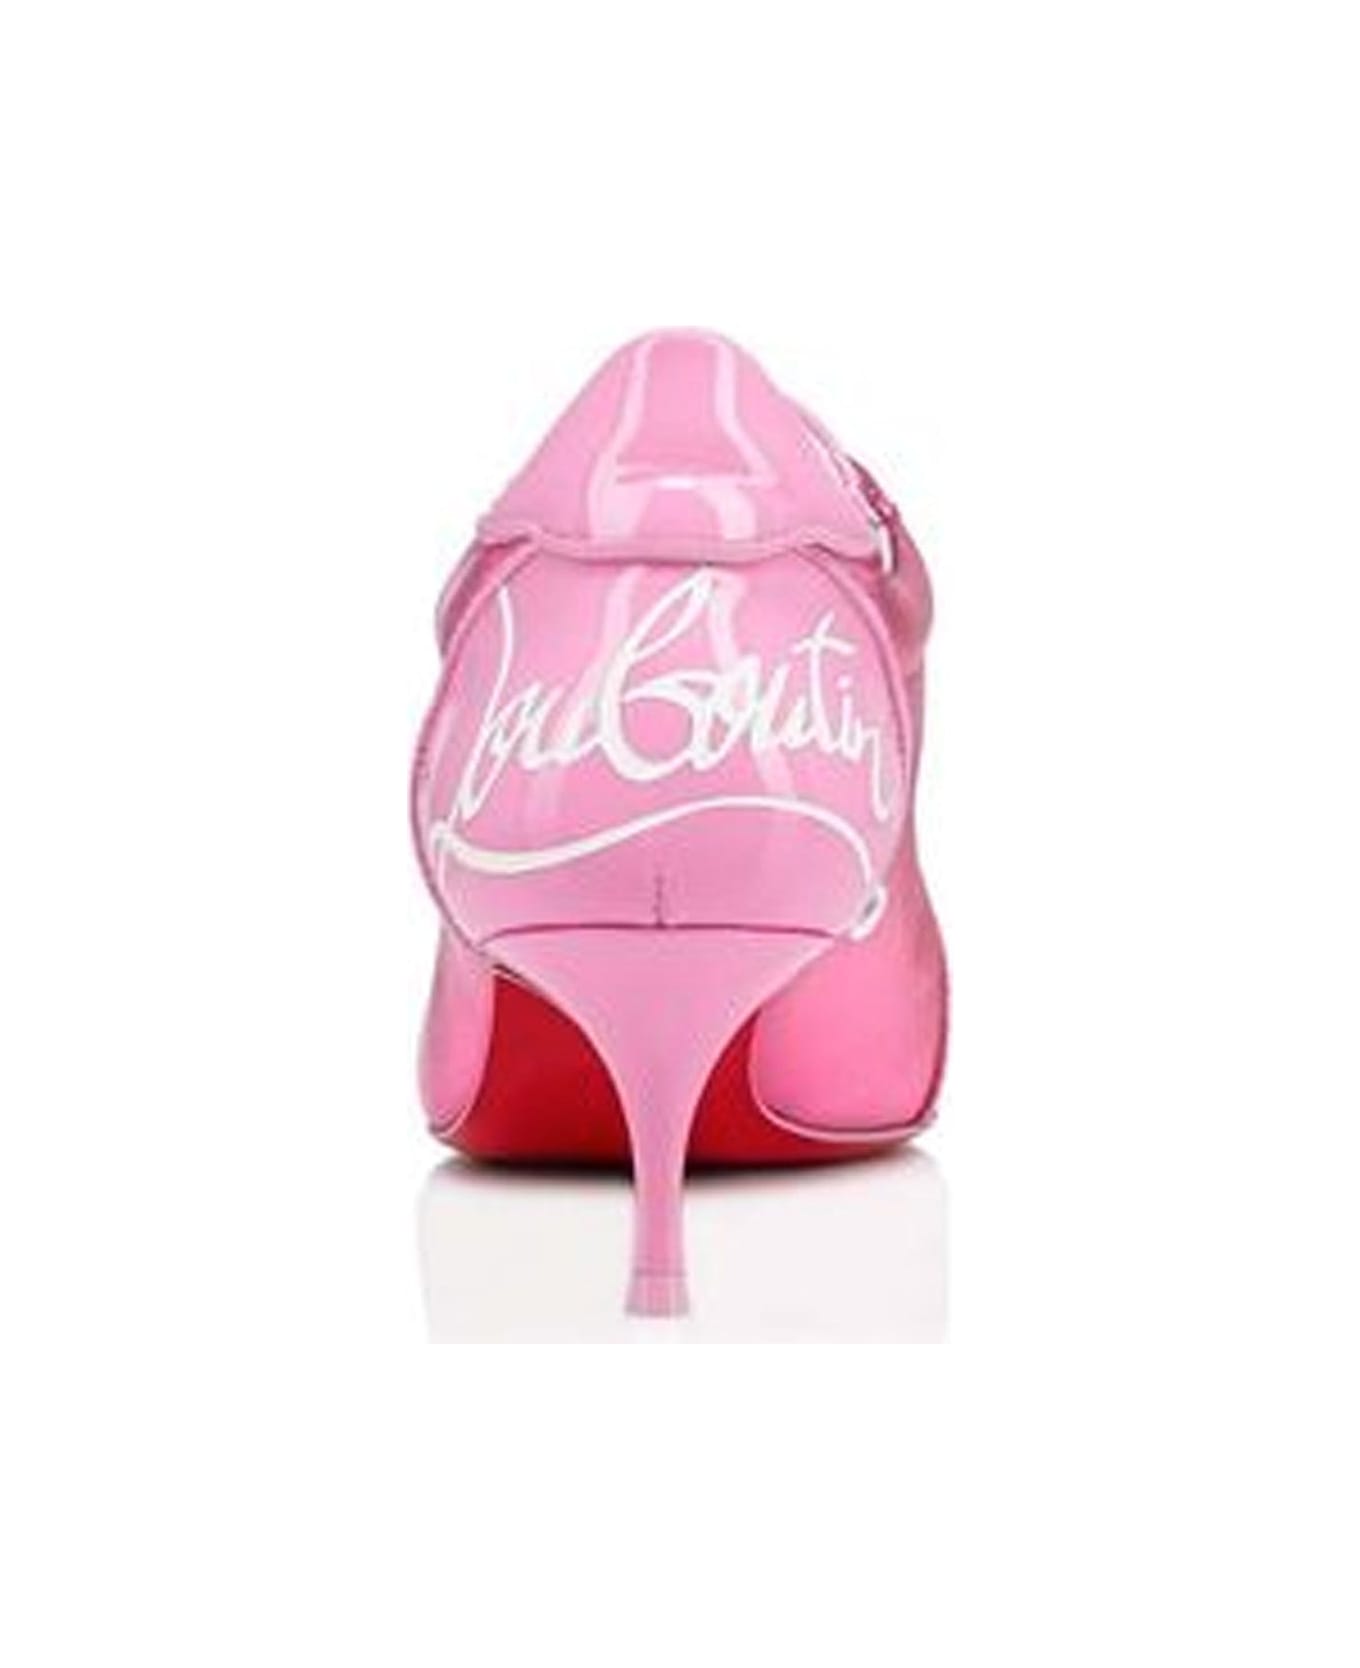 Christian Louboutin Leather Pumps - Pink